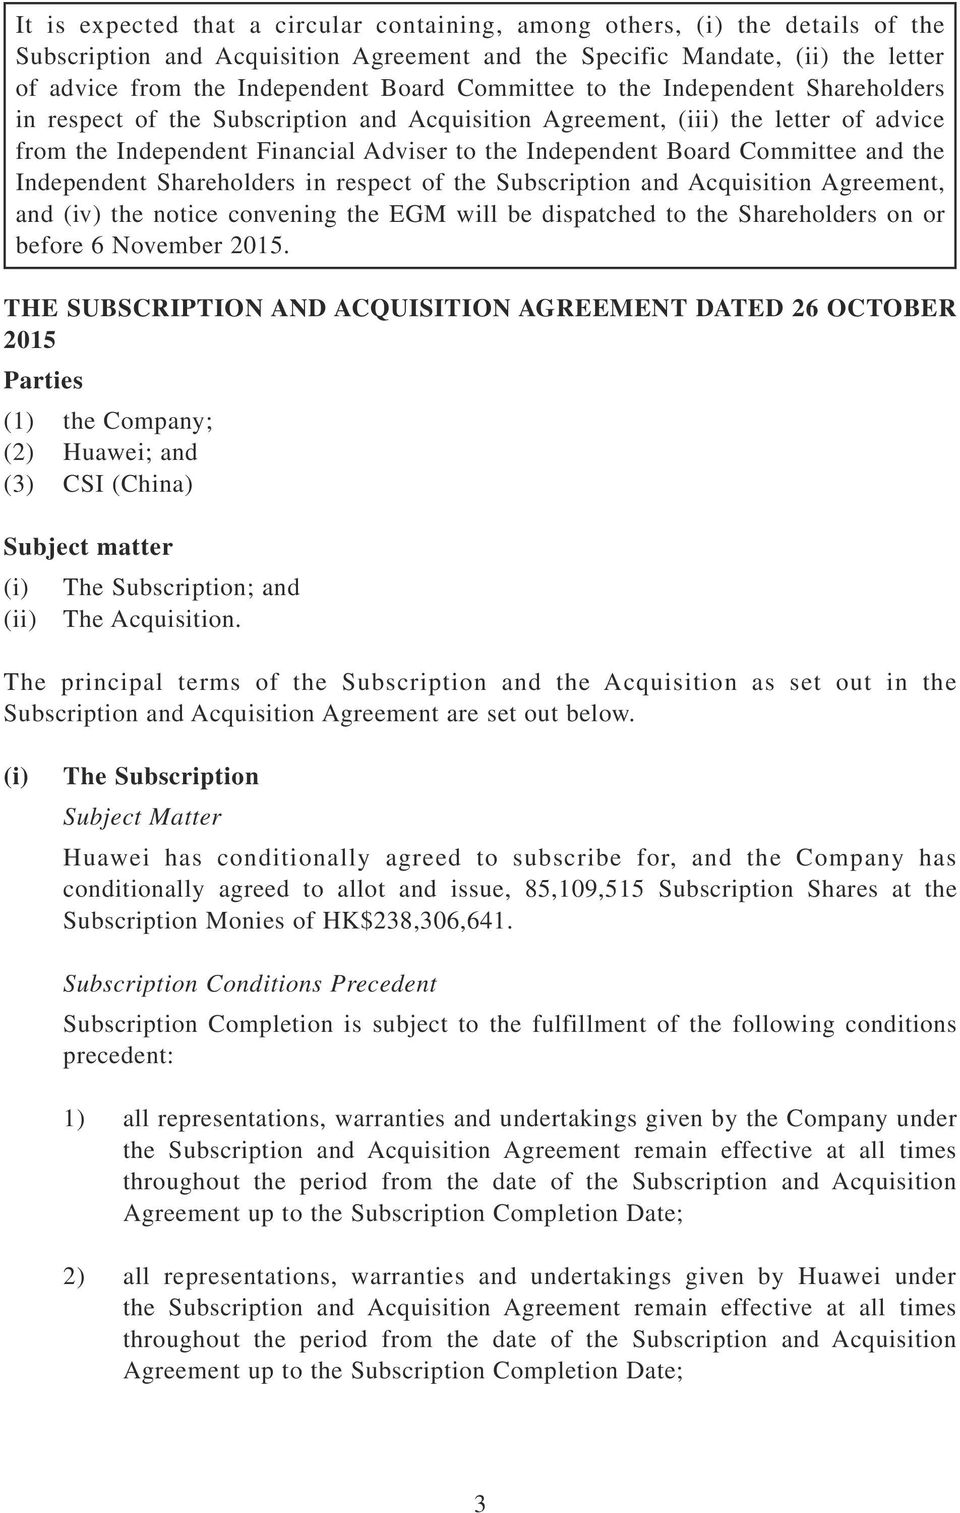 Committee and the Independent Shareholders in respect of the Subscription and Acquisition Agreement, and (iv) the notice convening the EGM will be dispatched to the Shareholders on or before 6